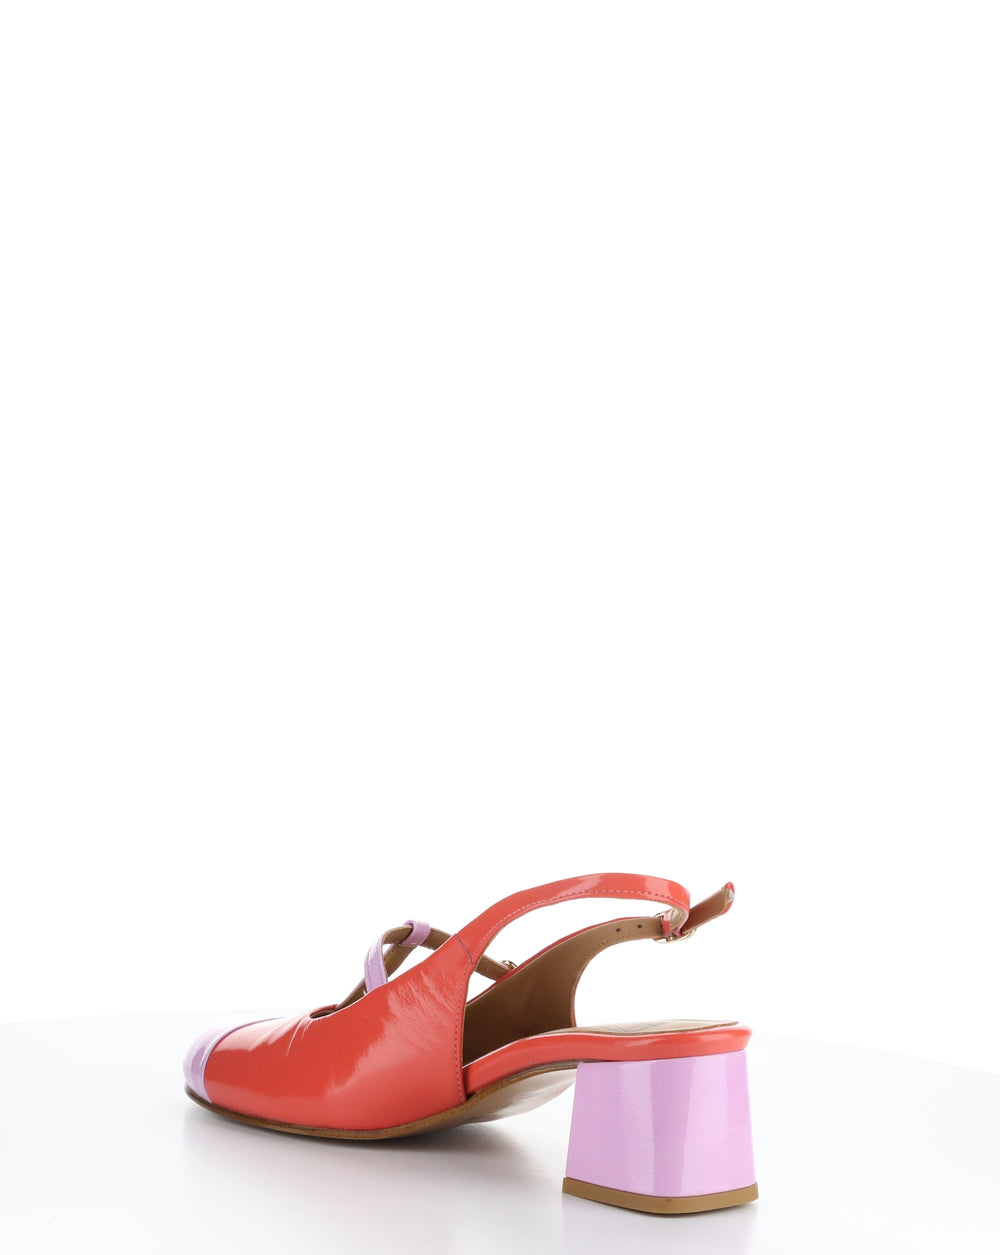 SOLN083FLY 001 PINK/SCARLET Round Toe Shoes